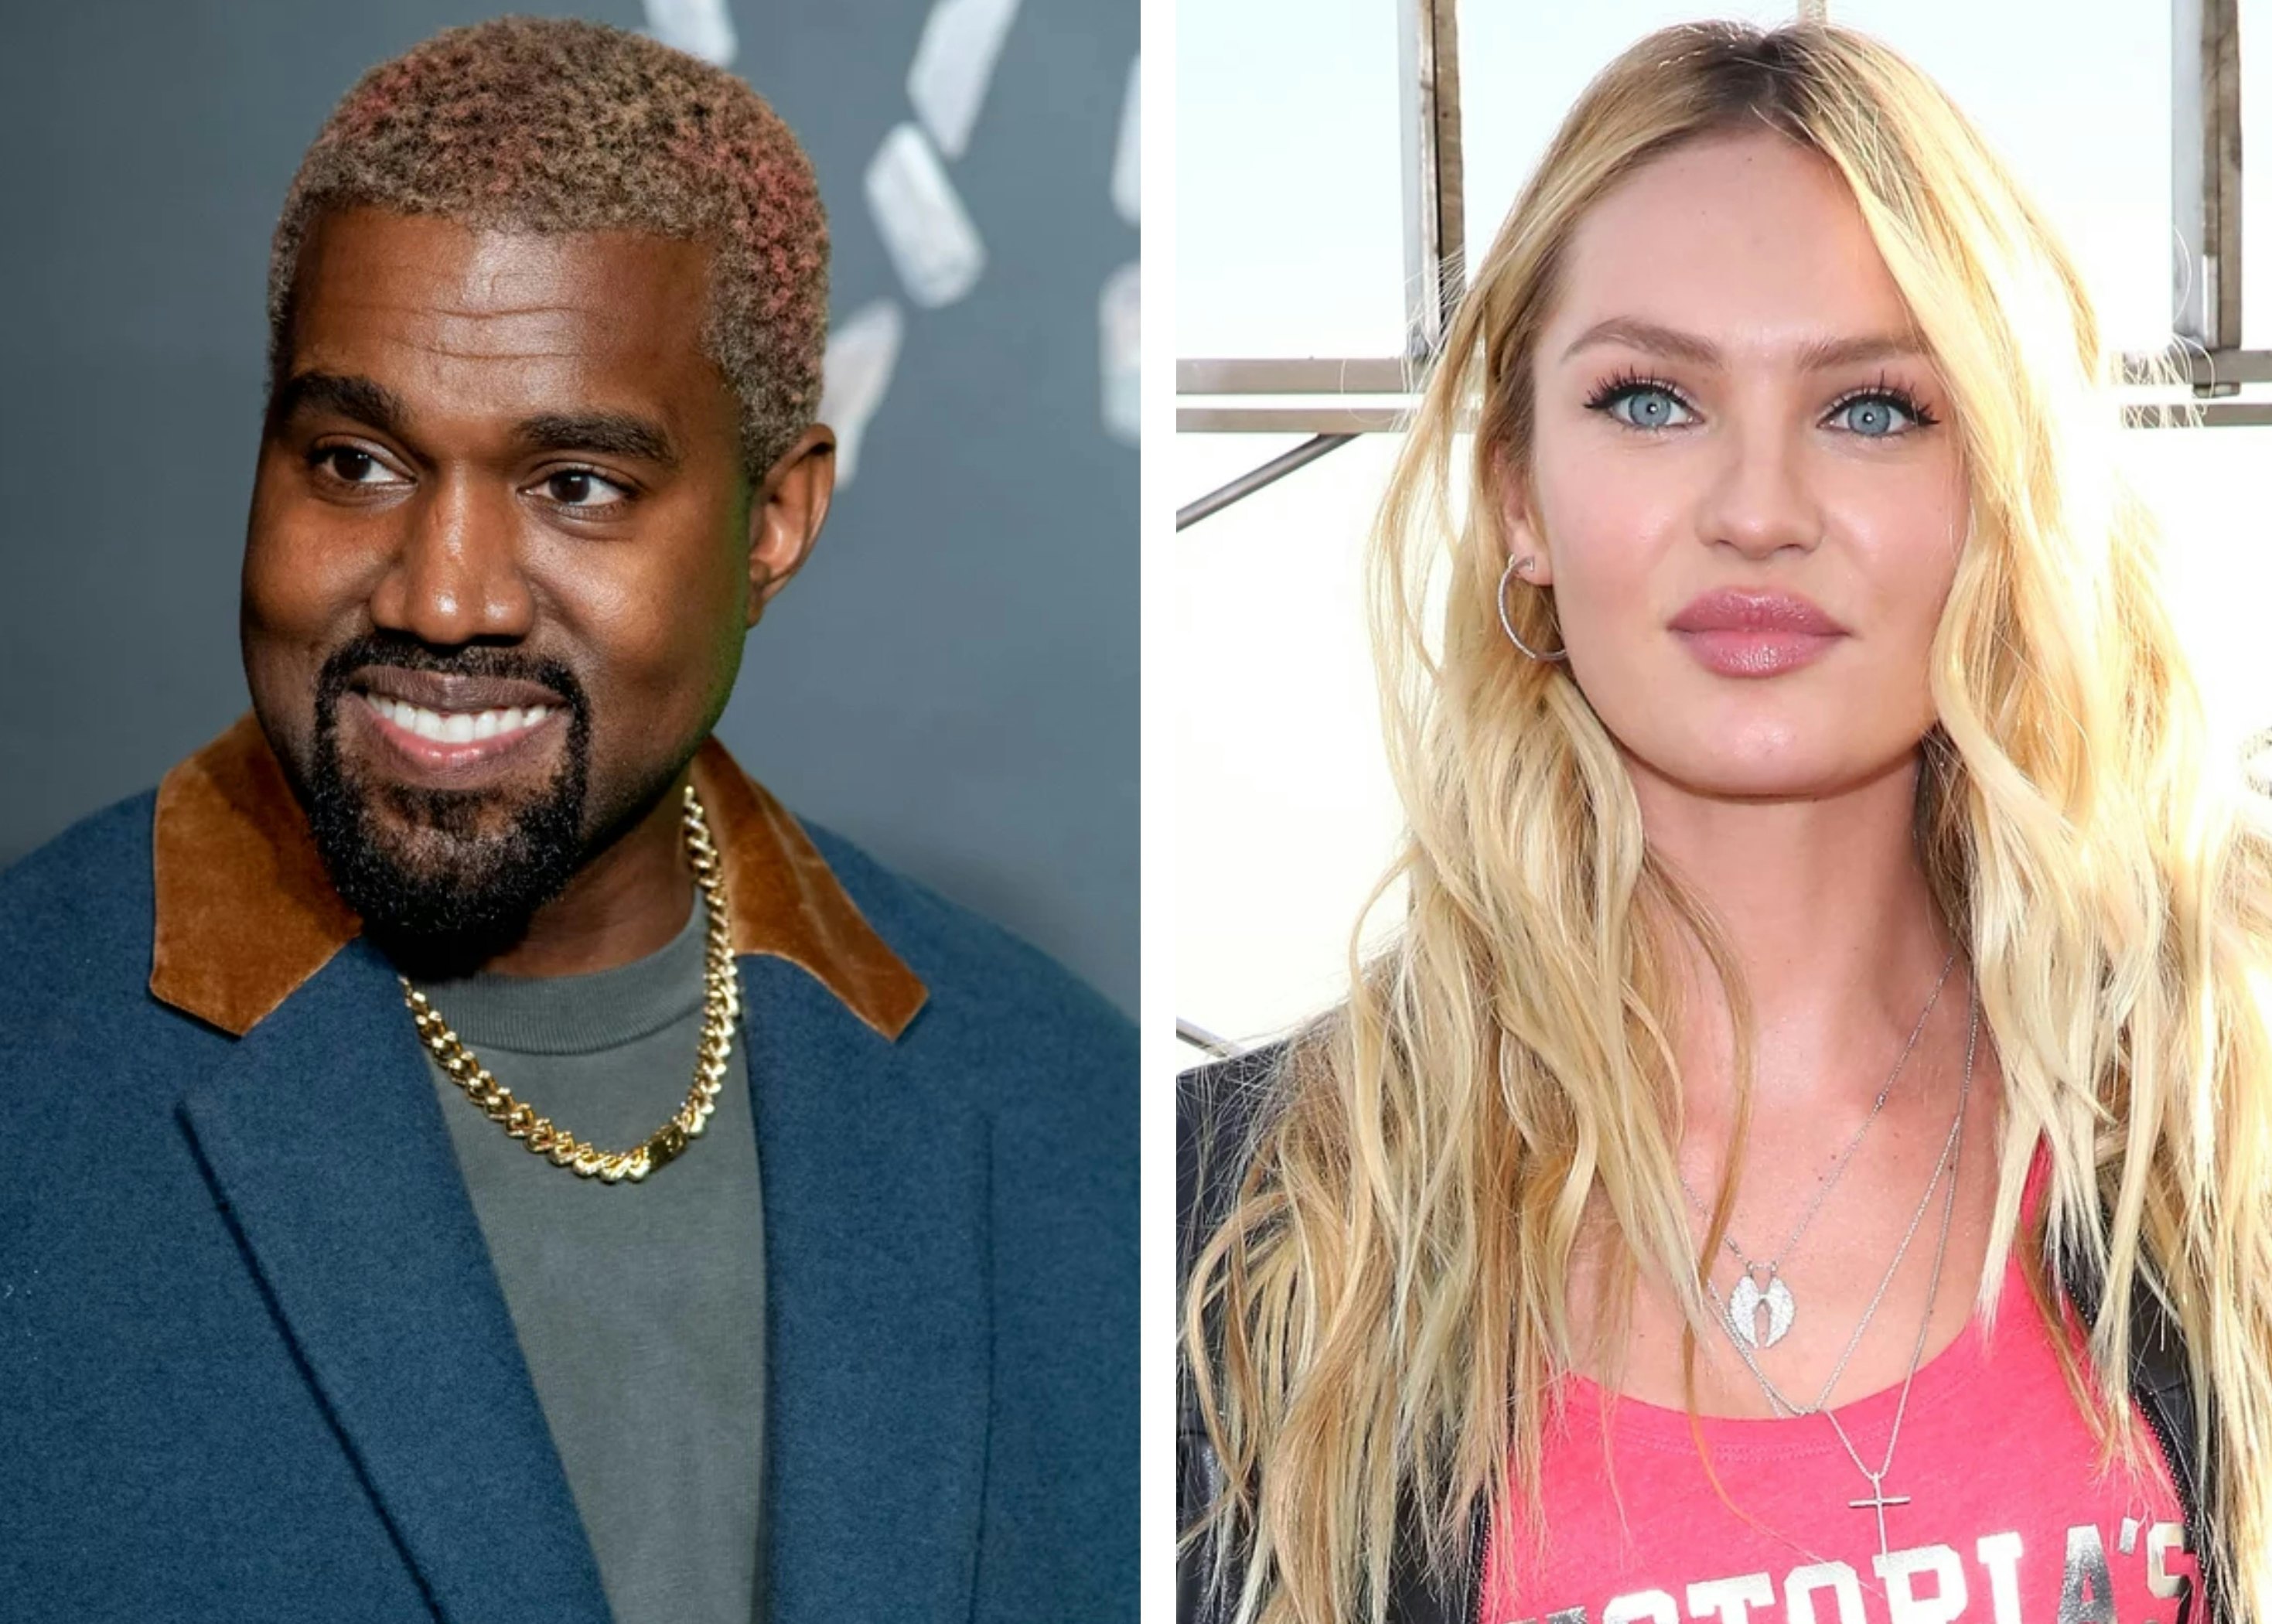 Kanye West and Candice Swanepoel are dating